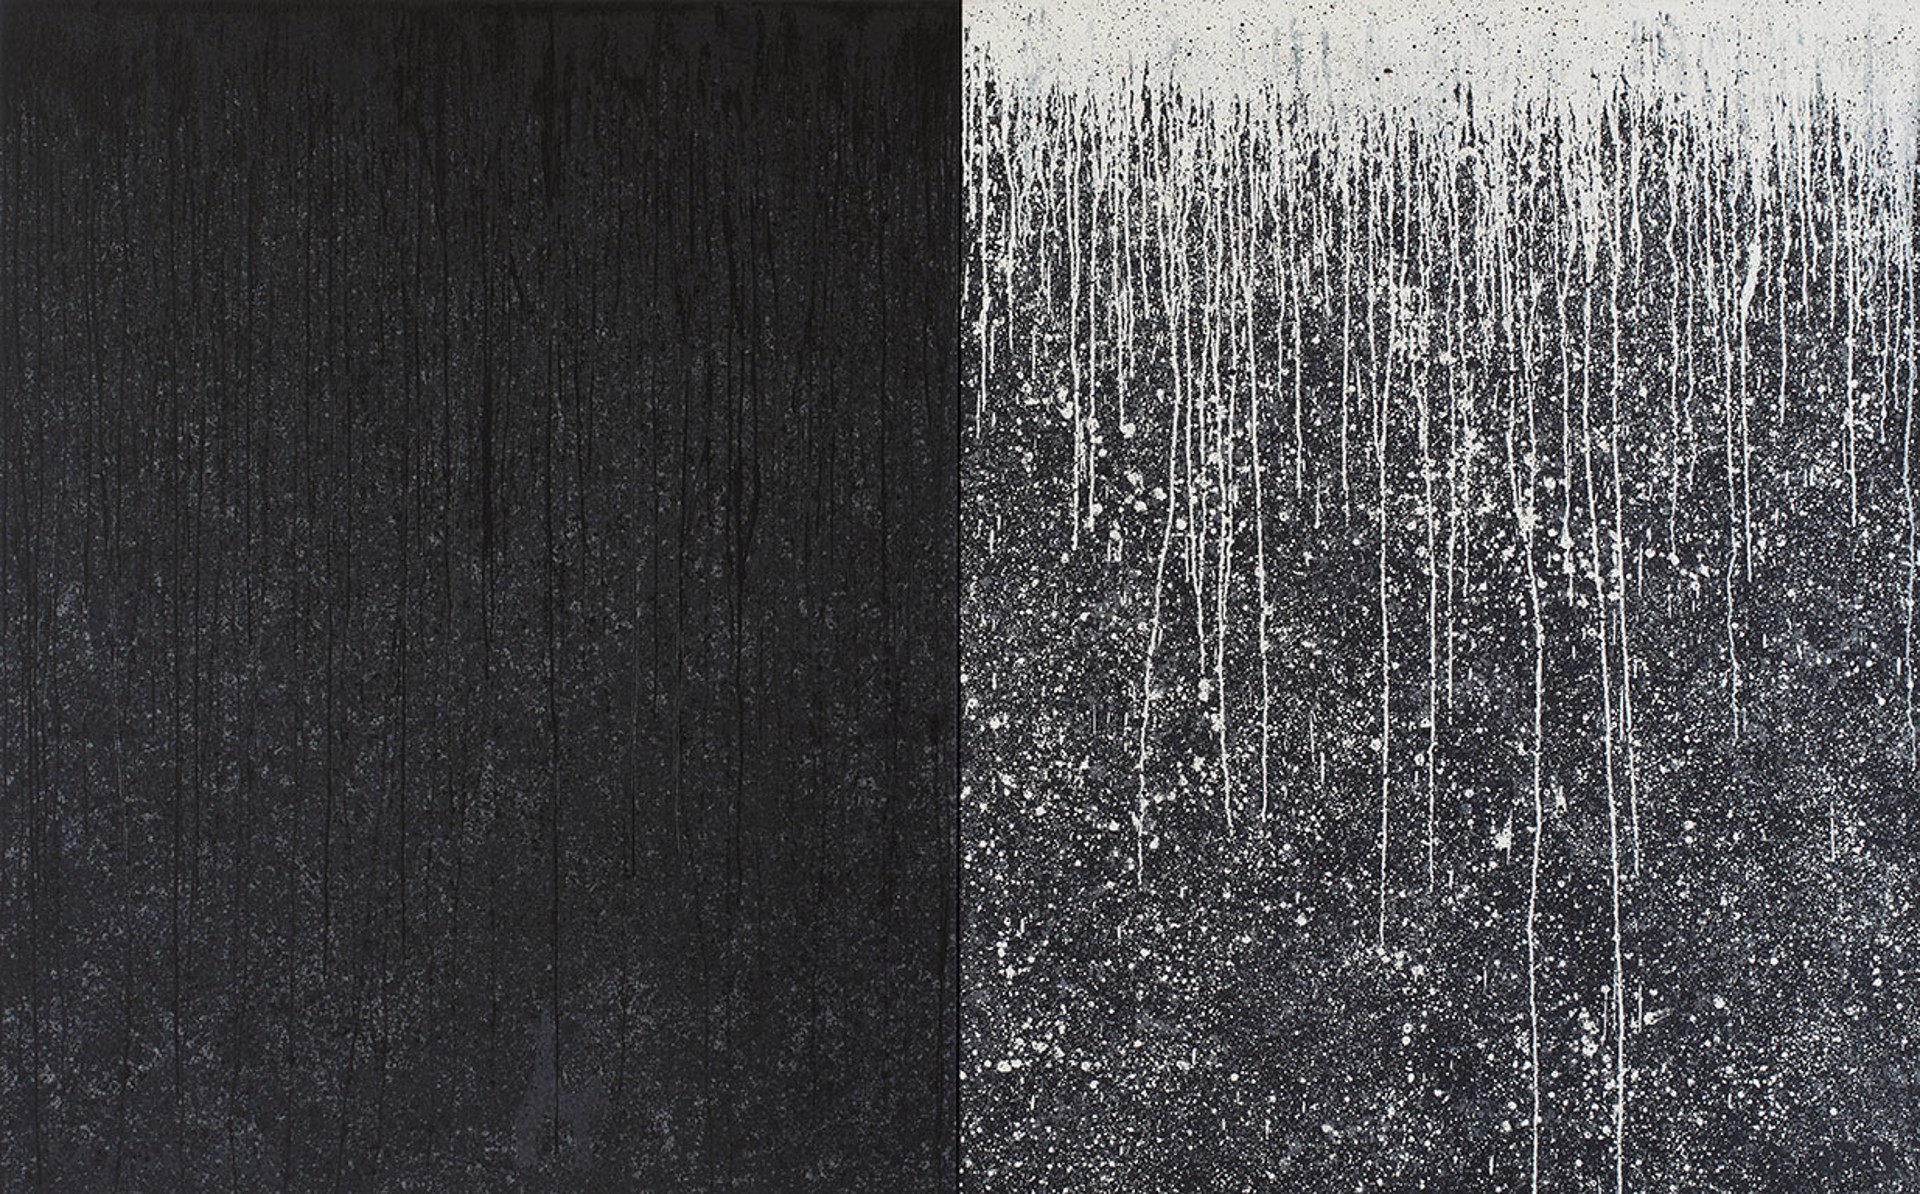 Rider in the Storm [Diptych] by Javier Manrique